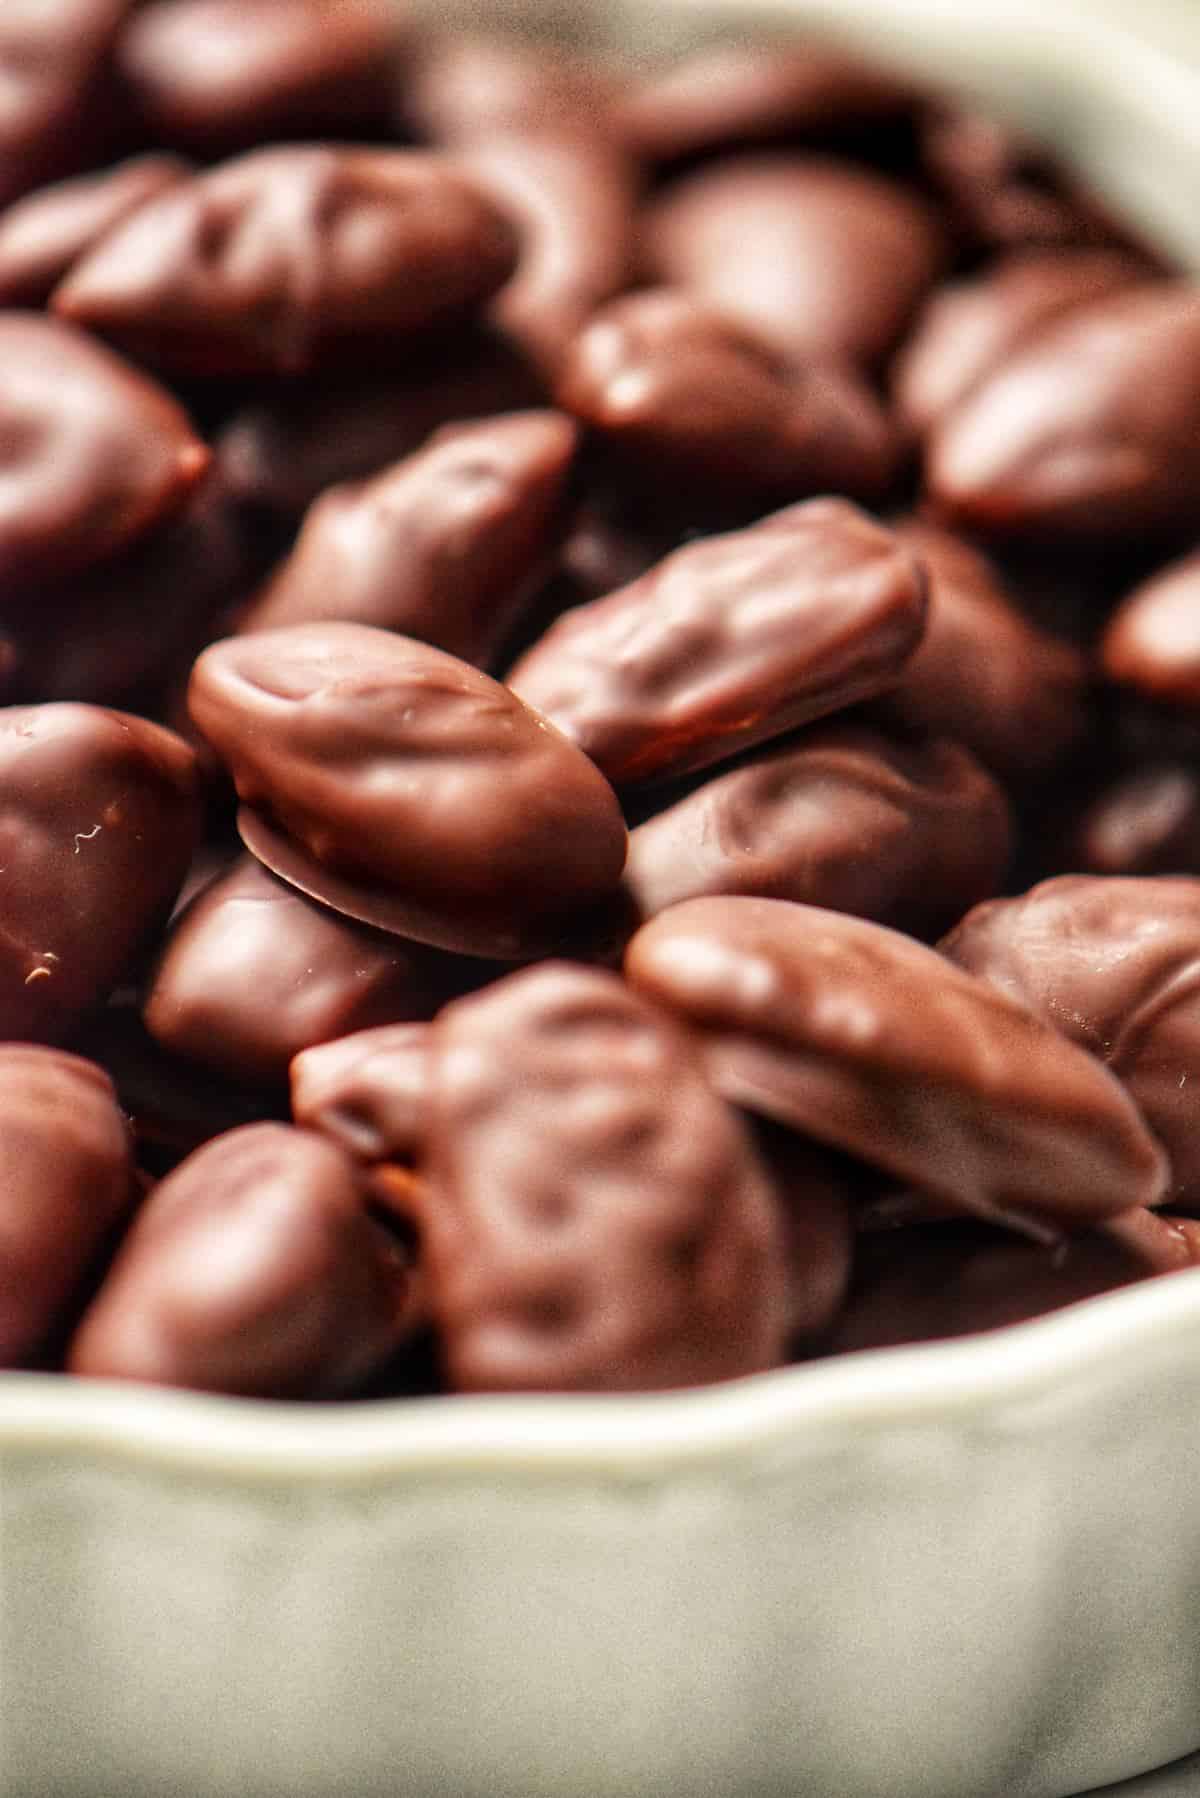 A close up shot of the chocolate covered almonds.